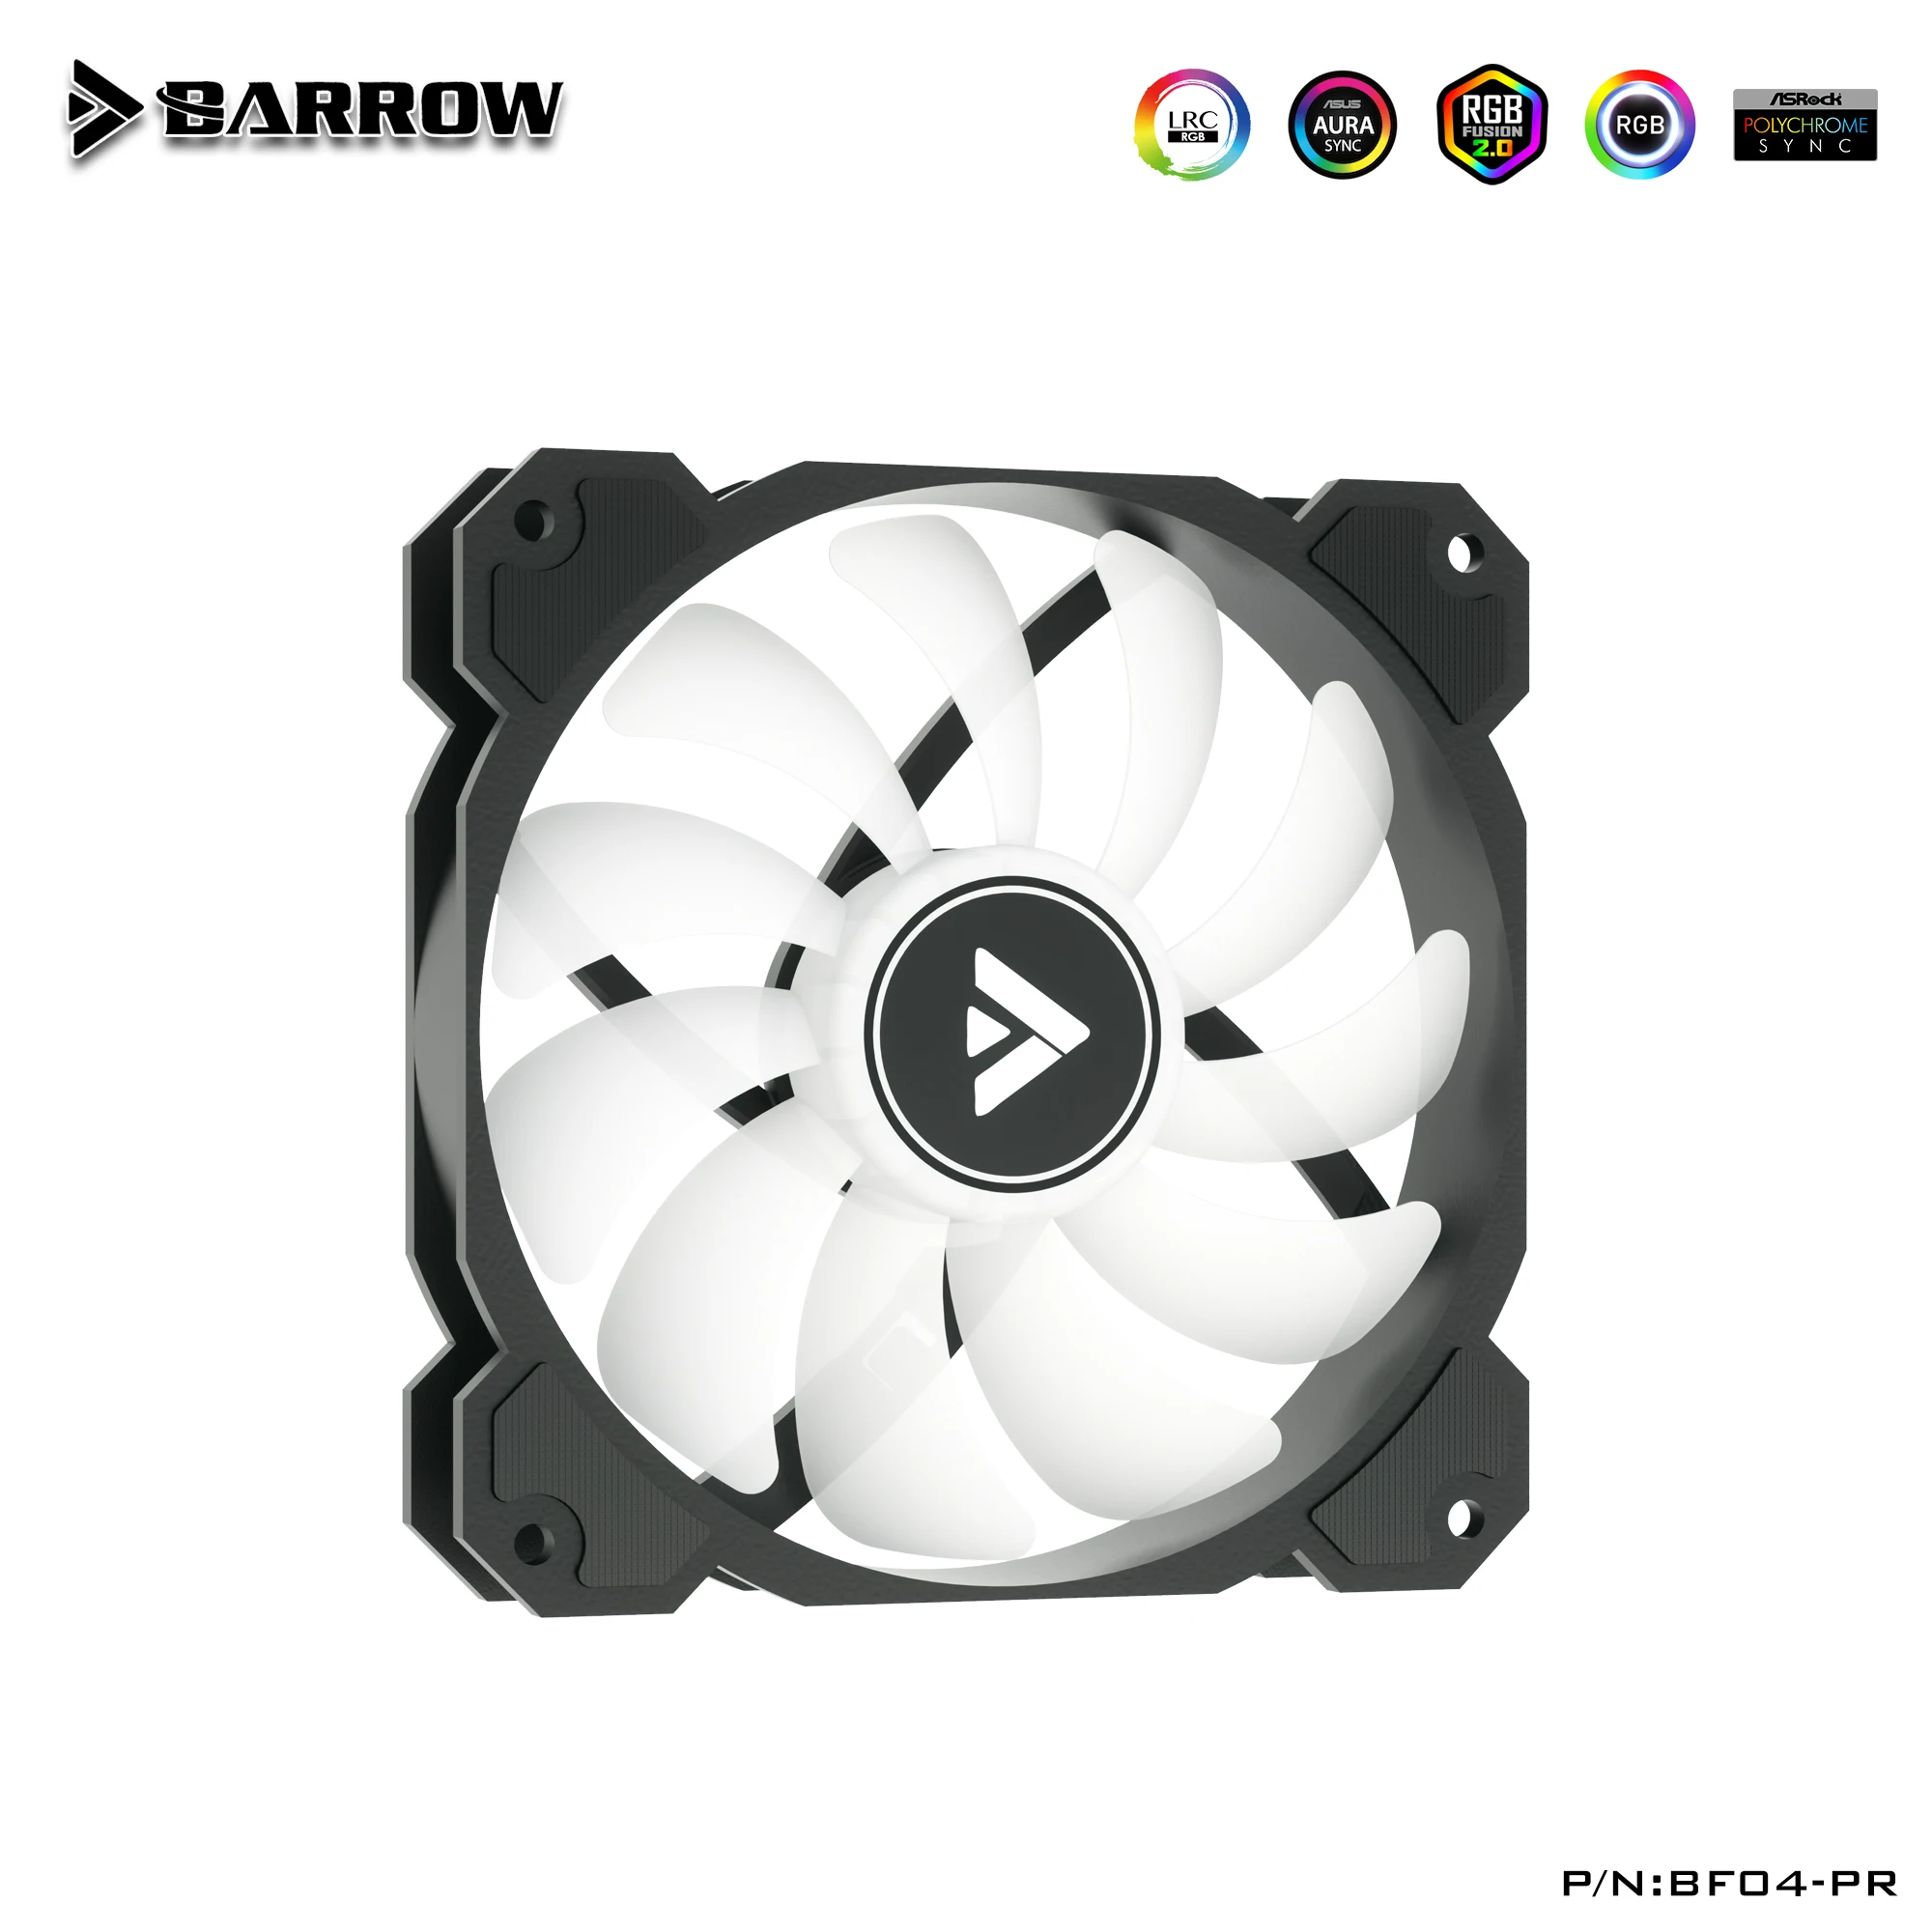 

Barrow Water cooler PC fan cooling 12V 120mm cooler RGB BF04-PR for RGB PC PWM adjust speed LRC 2.0 computer accessories